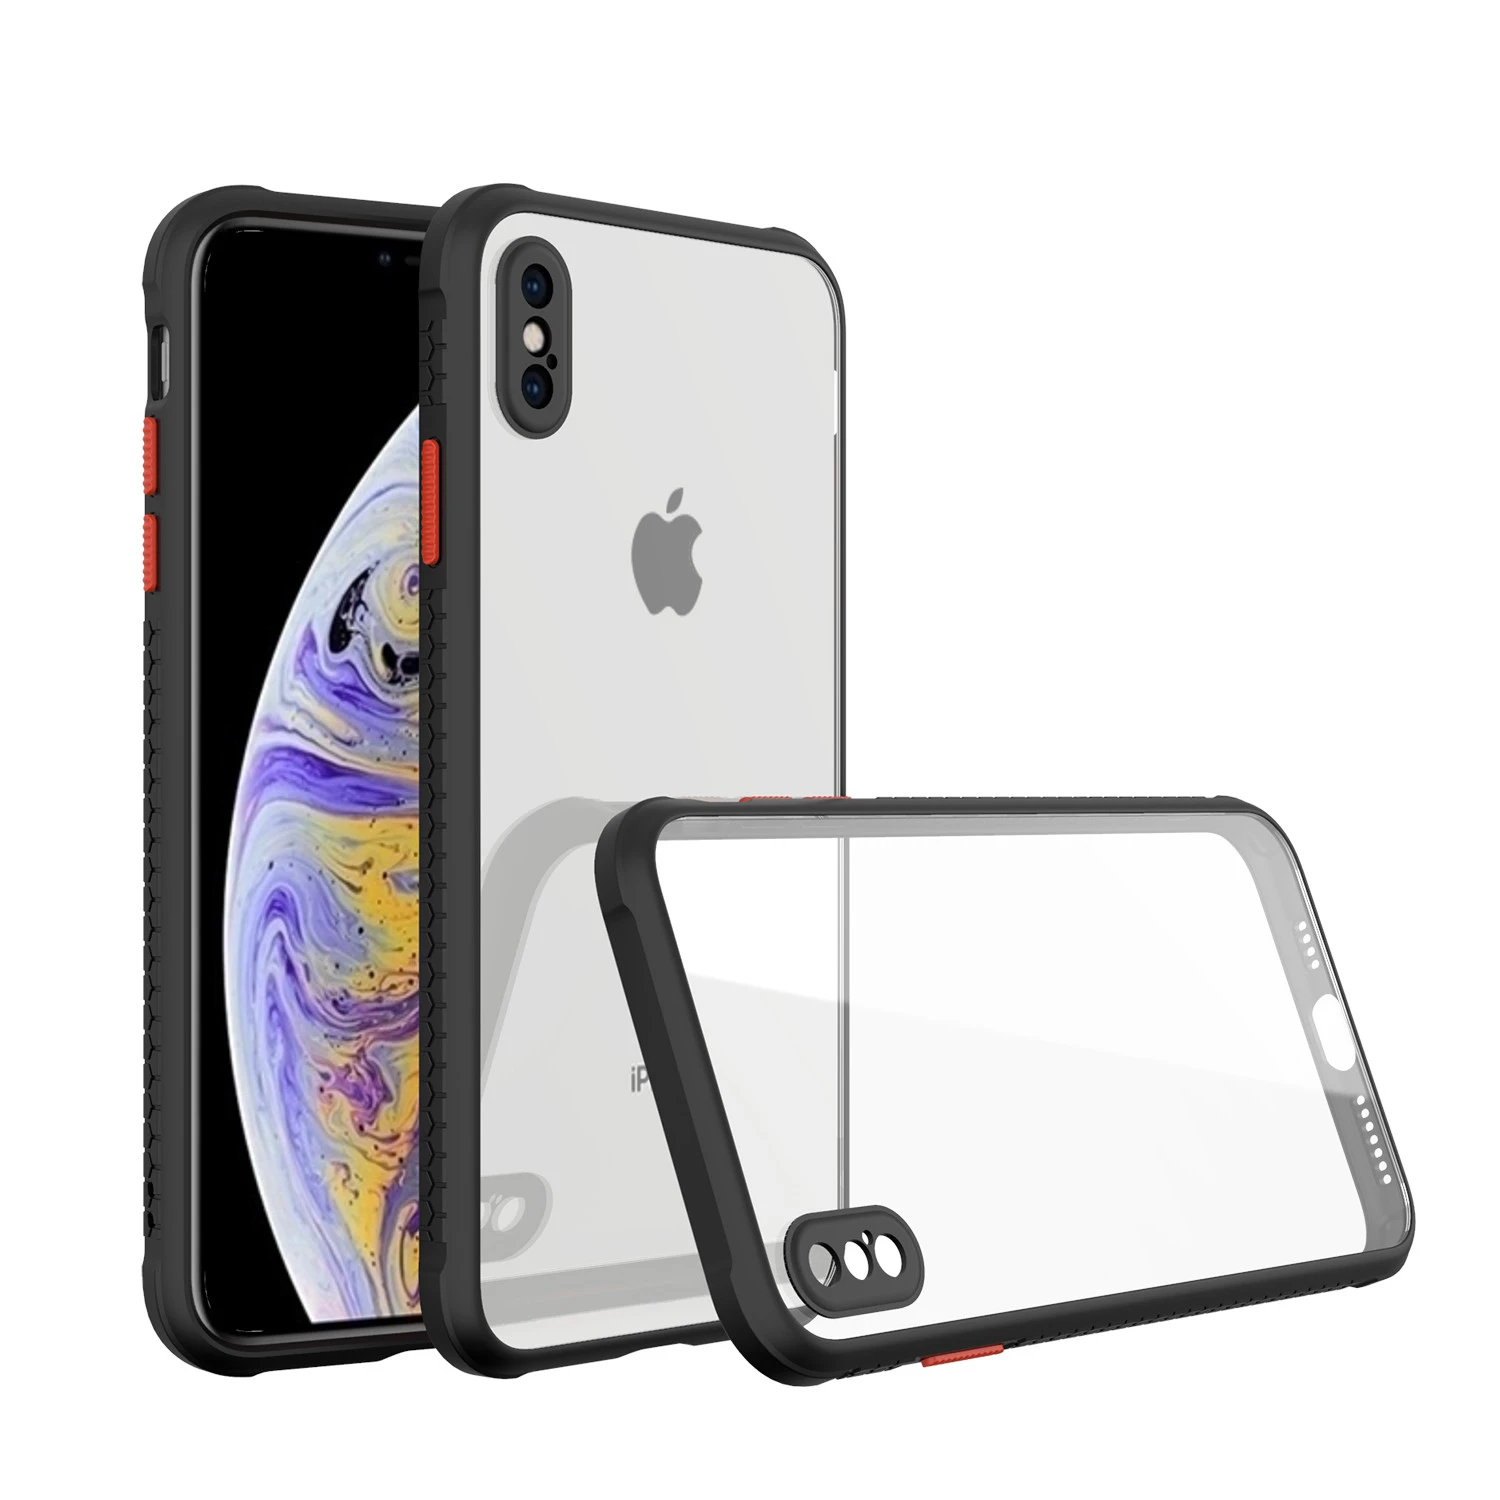 Cellphone Accessories Anti-fall Scratch-proof Clear Case For Iphone 11 Pro Max Cover 12 Pro Max